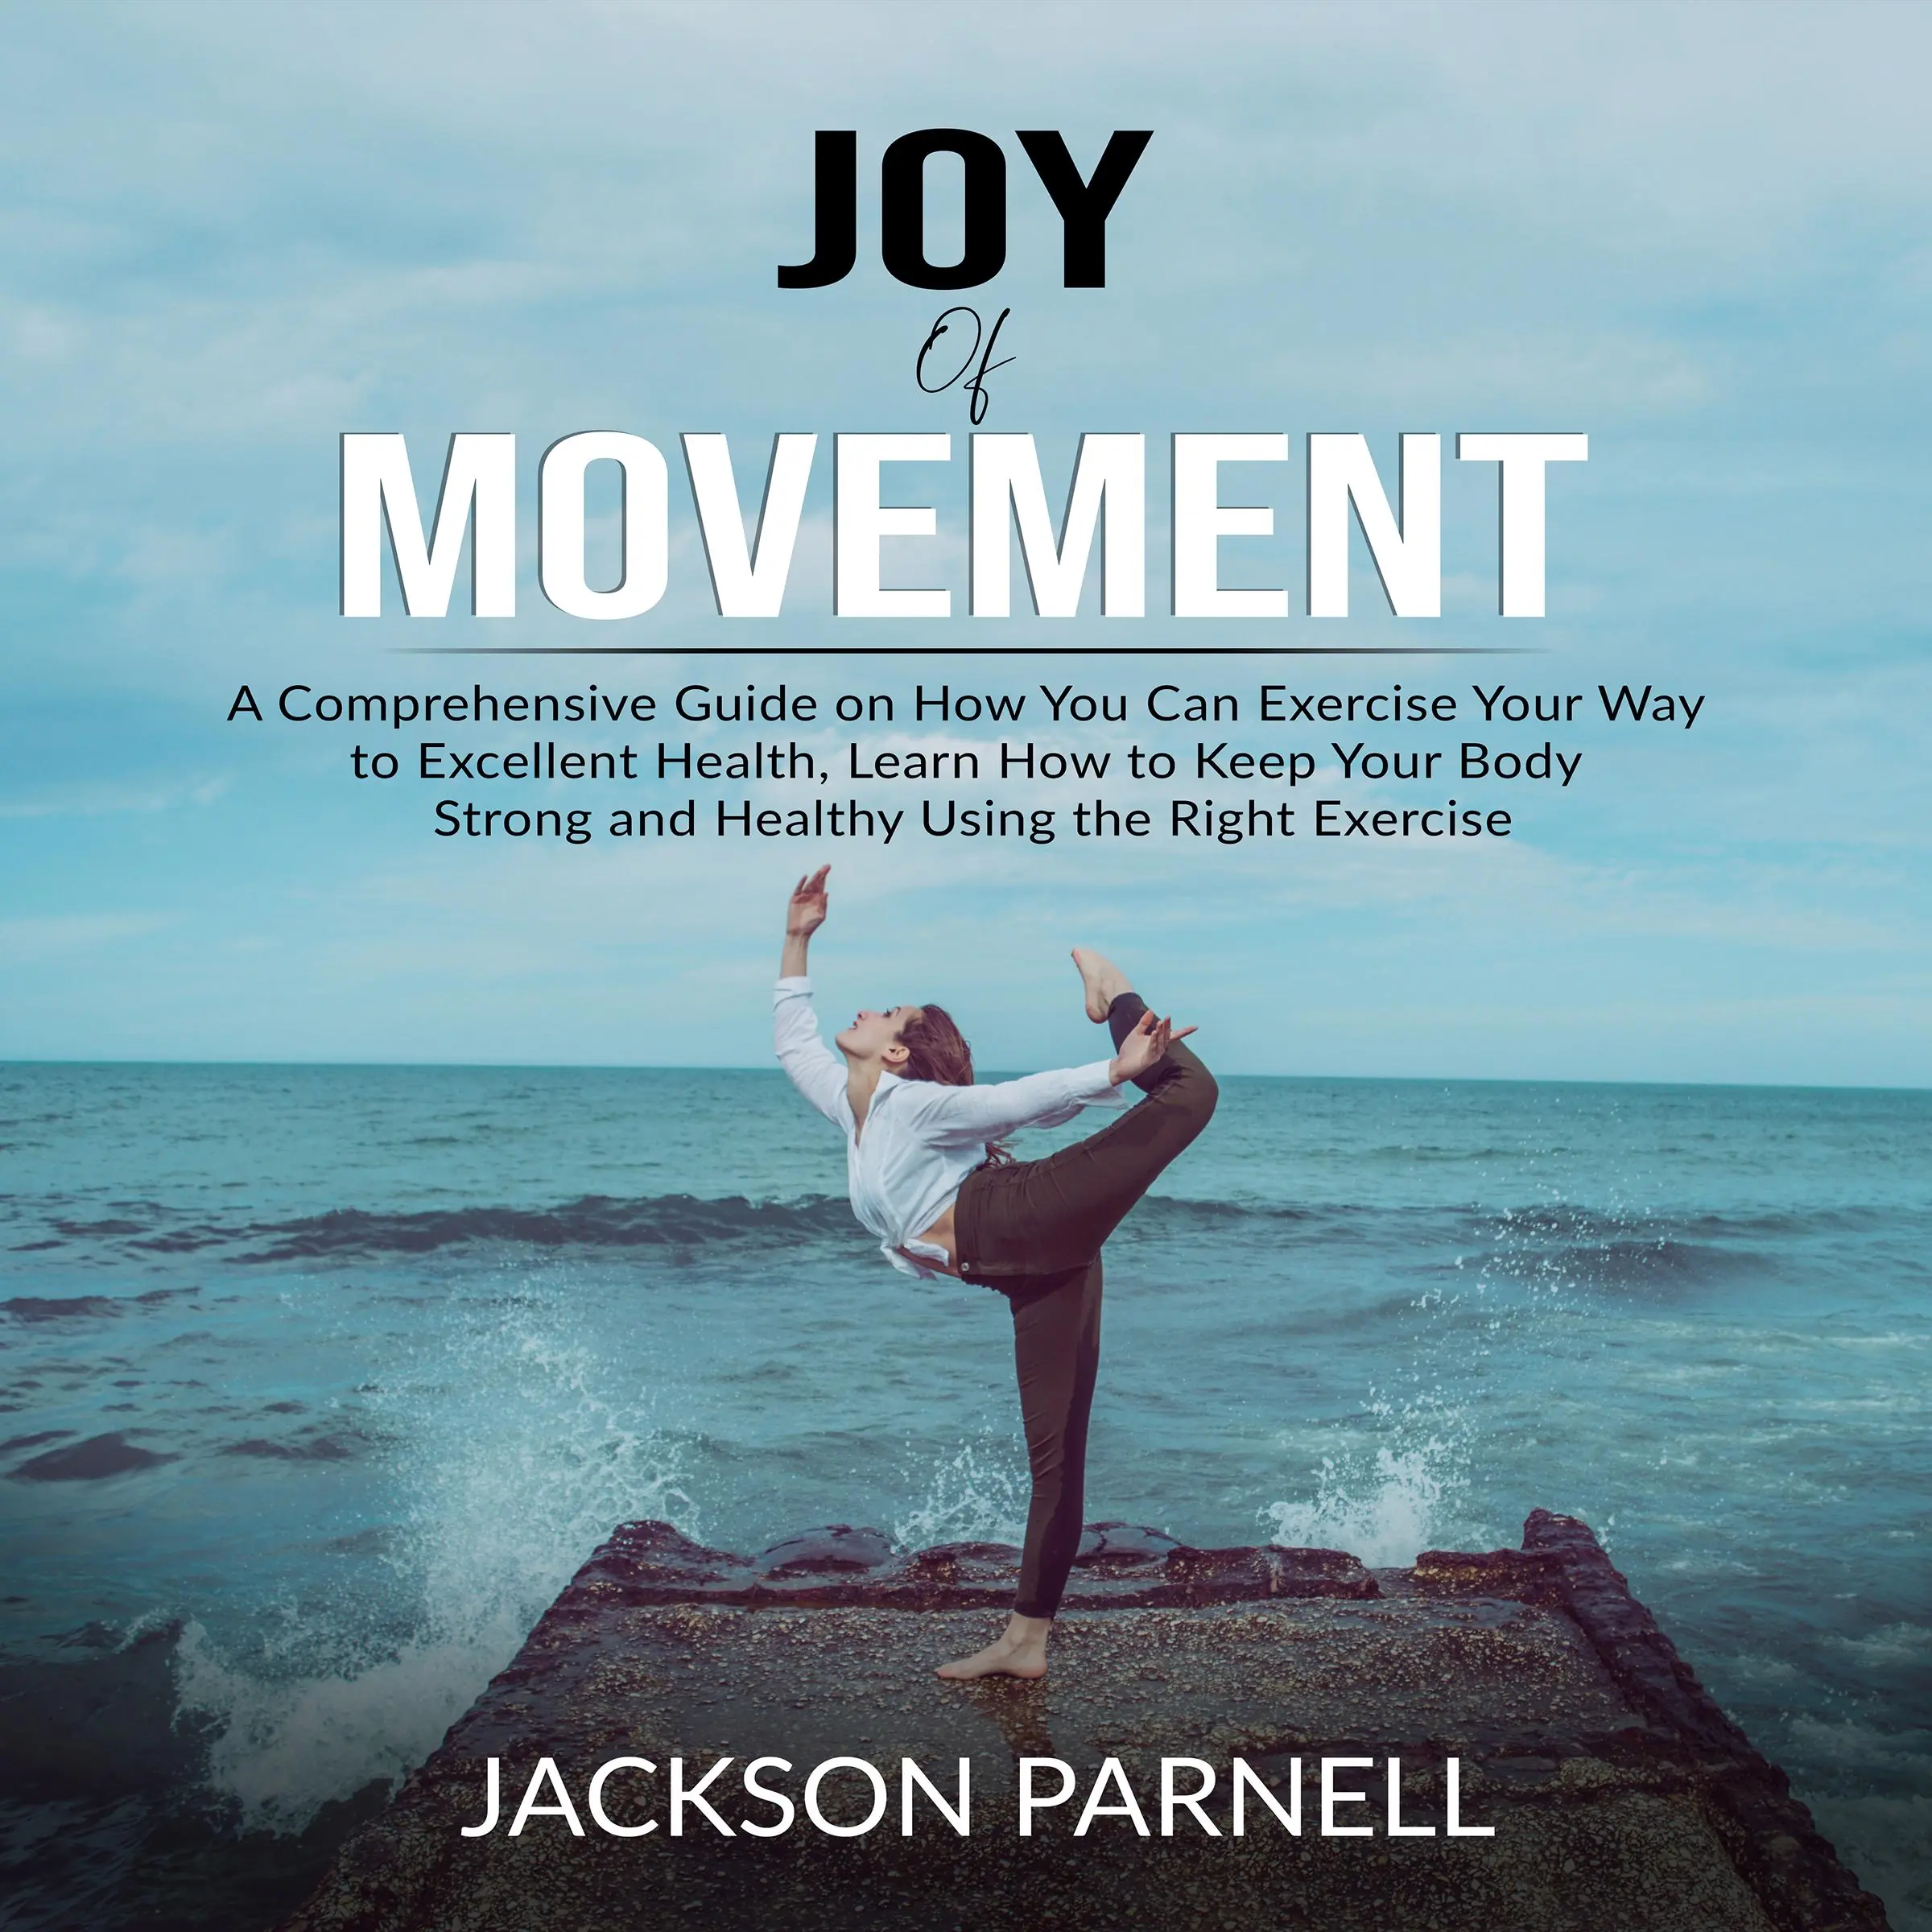 Joy of Movement: A Comprehensive Guide on How You Can Exercise Your Way to Excellent Health, Learn How to Keep Your Body Strong and Healthy Using the Right Exercise by Jackson Parnell Audiobook